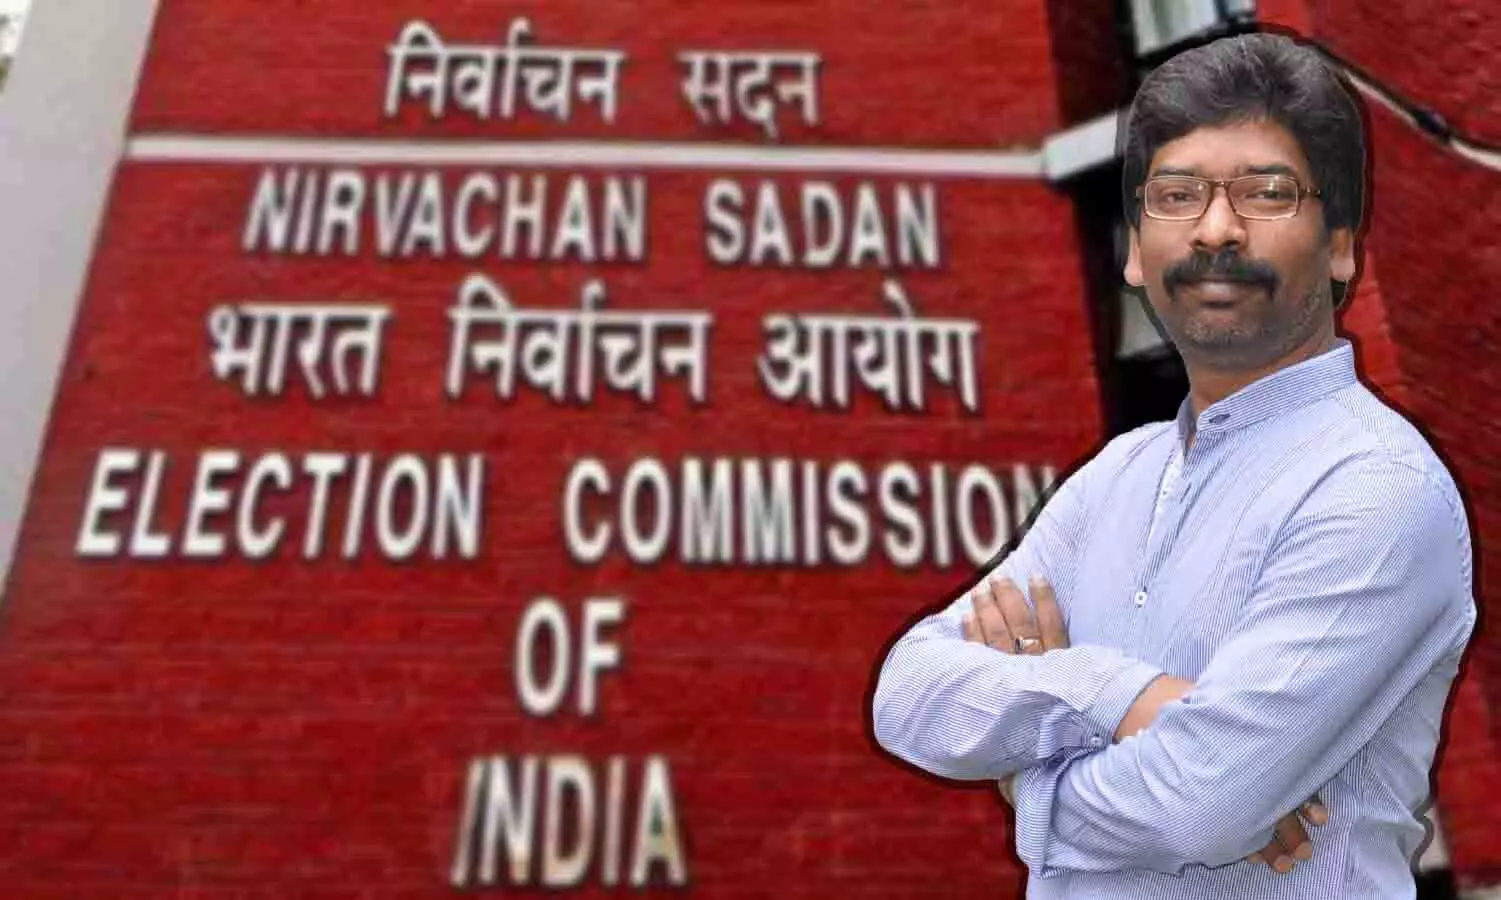 EC has sent a recommendation to the Governor to cancel the membership of CM Hemant Soren